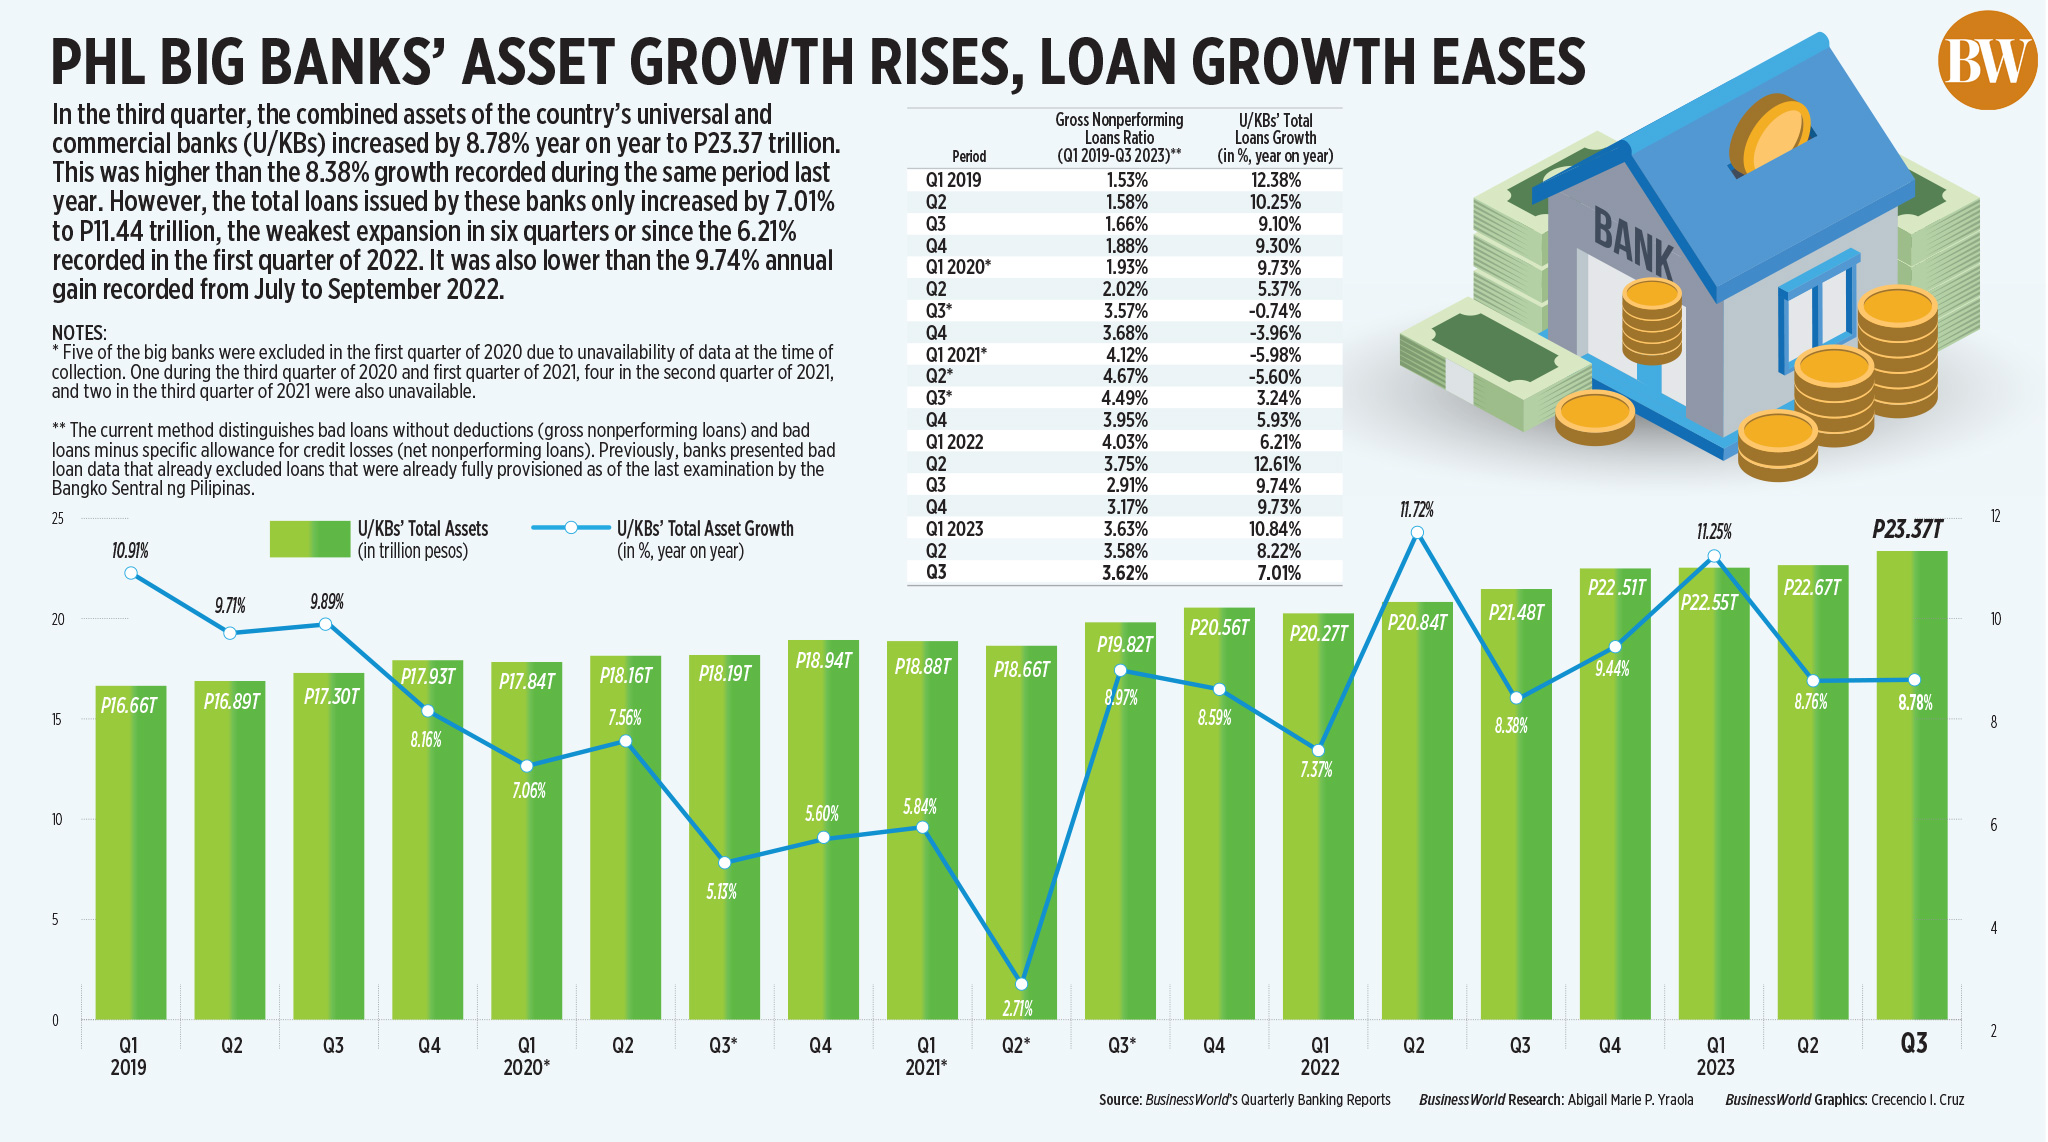 PHL big banks’ asset growth rises, loan growth eases